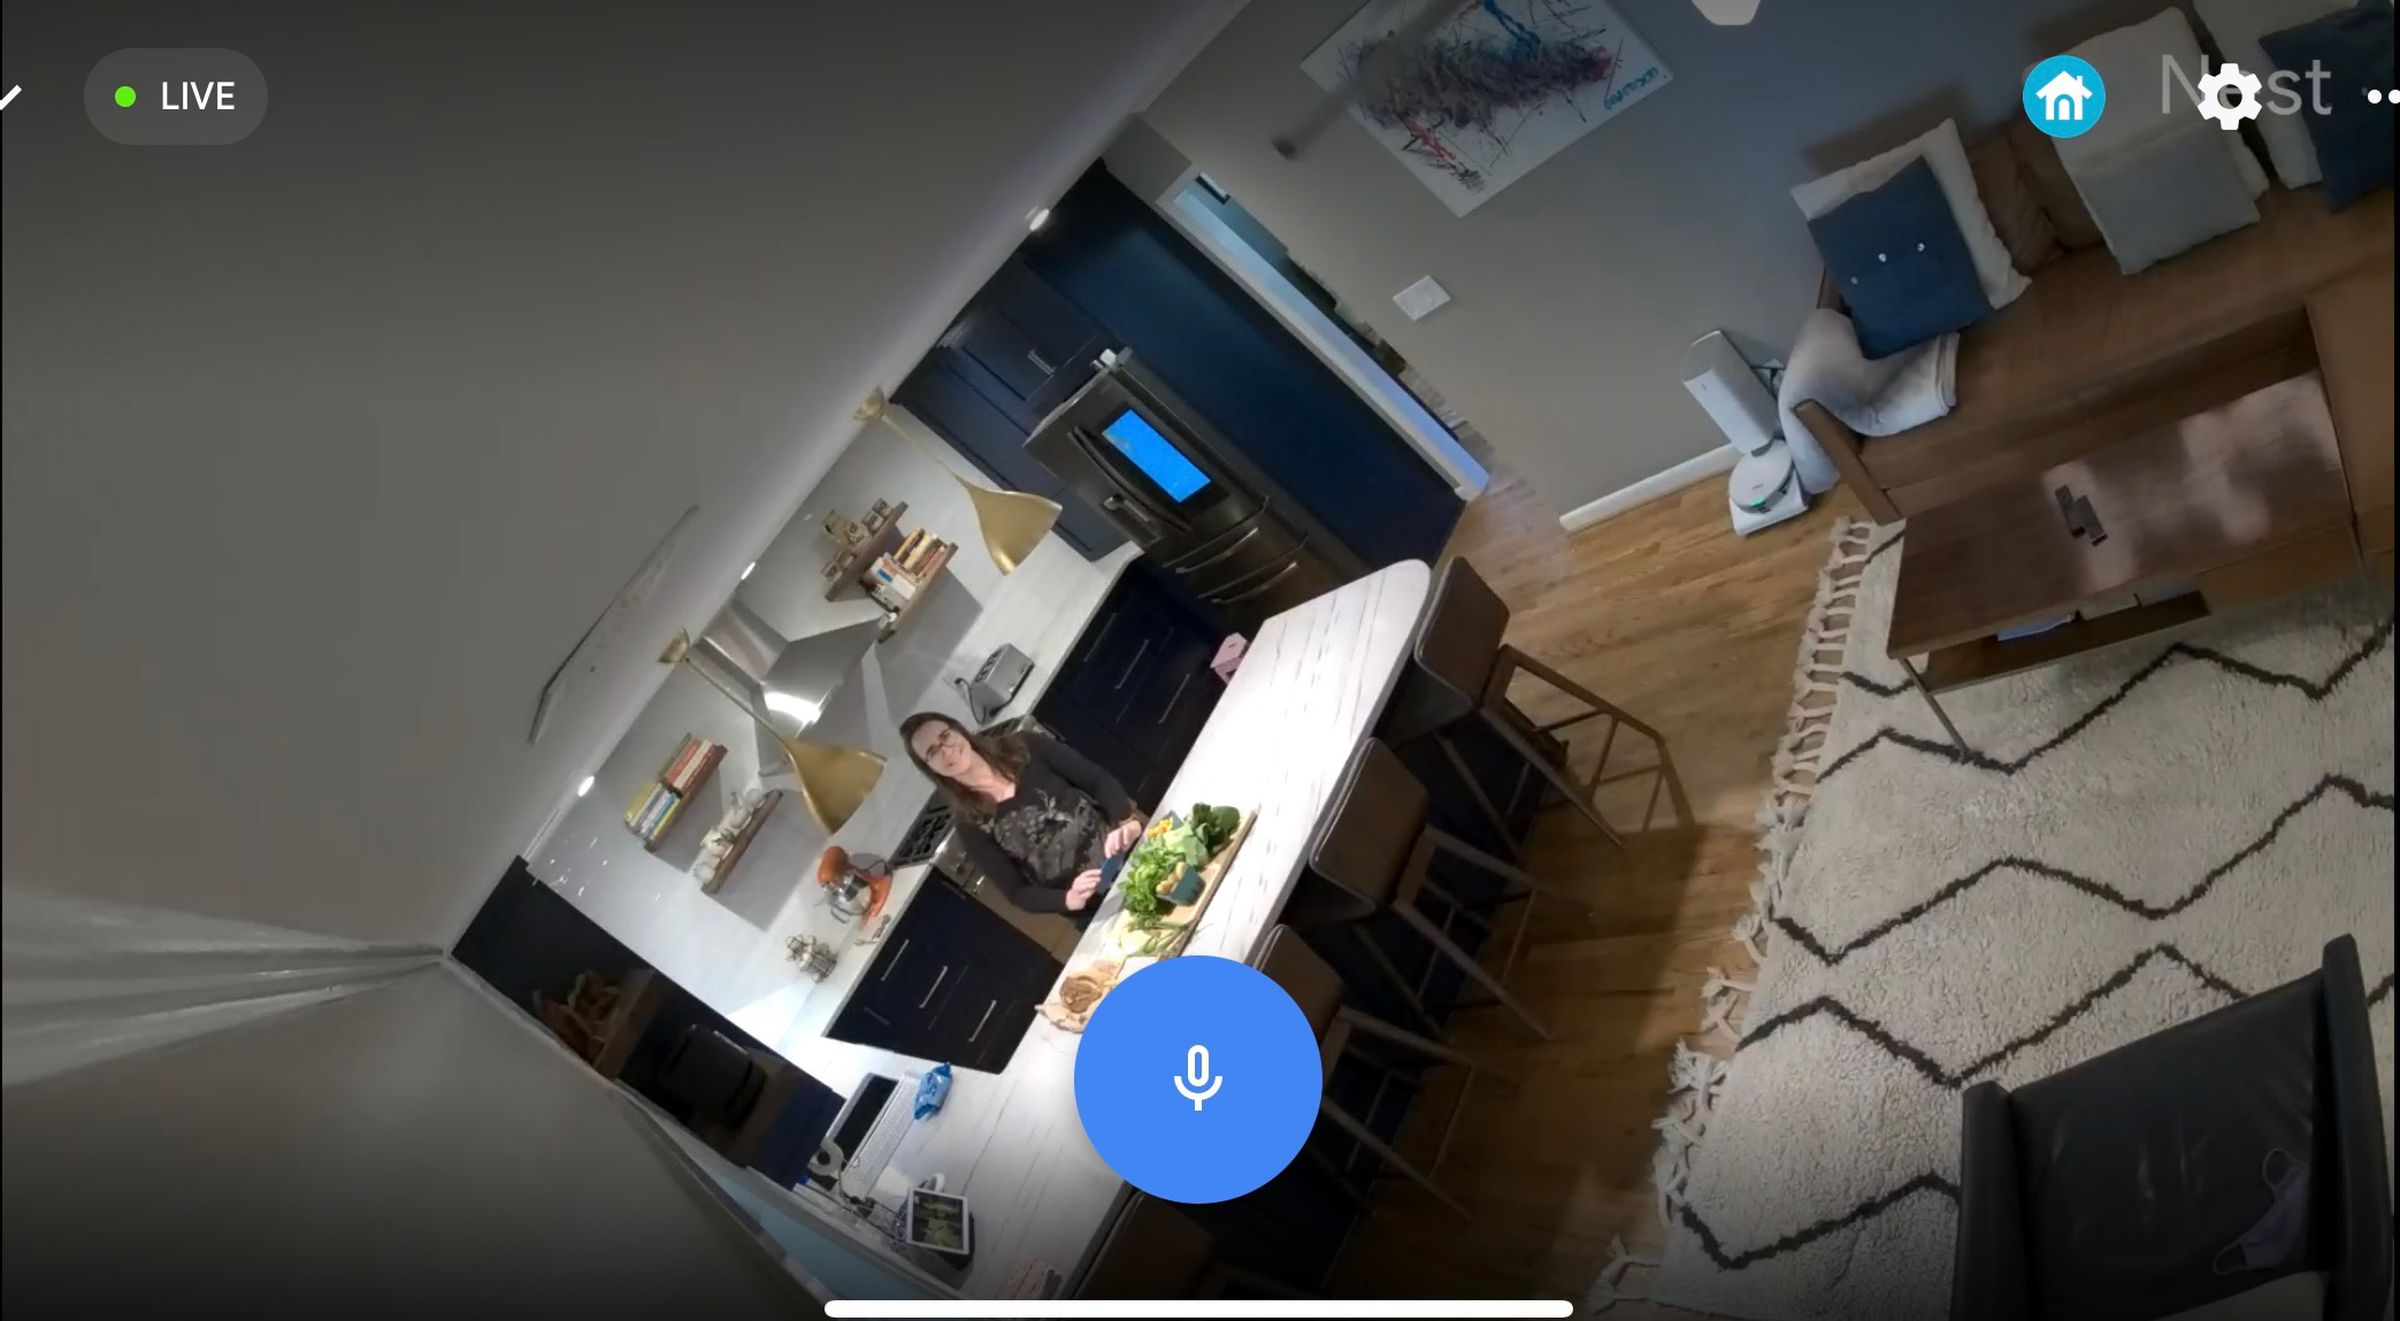 This image taken at the same time but from a wall-mounted Nest Cam IQ, provides a more accurate representation of my kitchen.